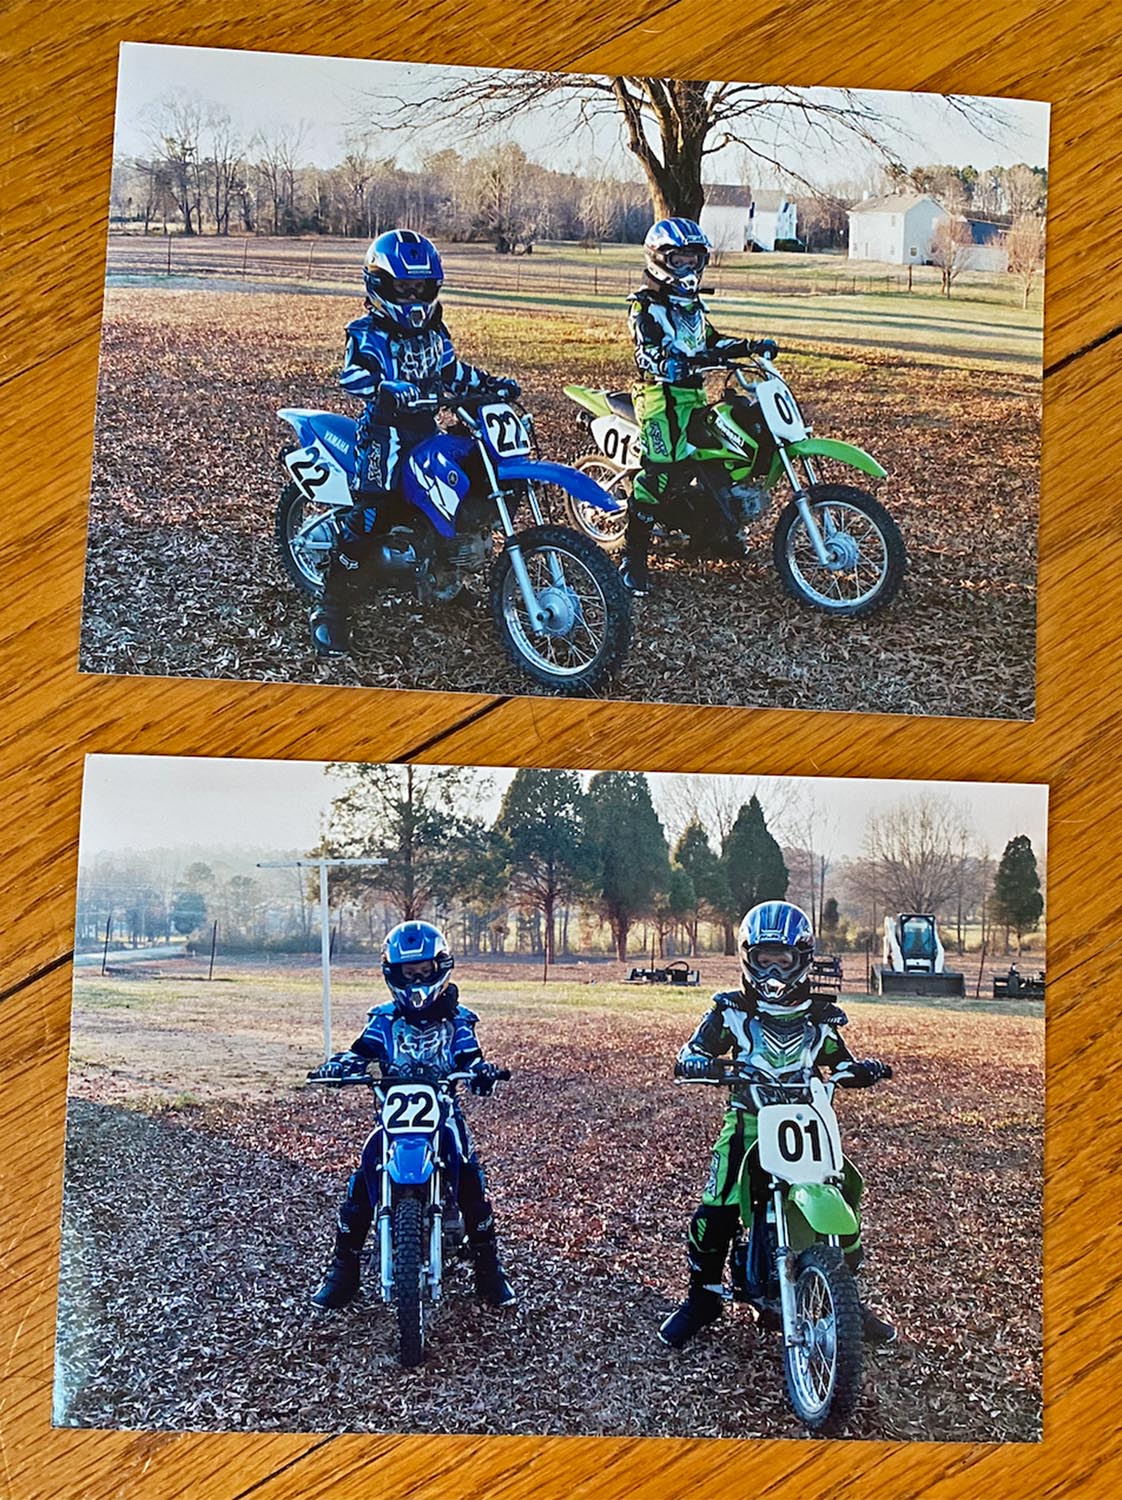 When Austin was 9 years old and Brandon was 7, they each had their own dirt bikes. Austin is on the green Kawasaki and Brandon is on the blue Yamaha.